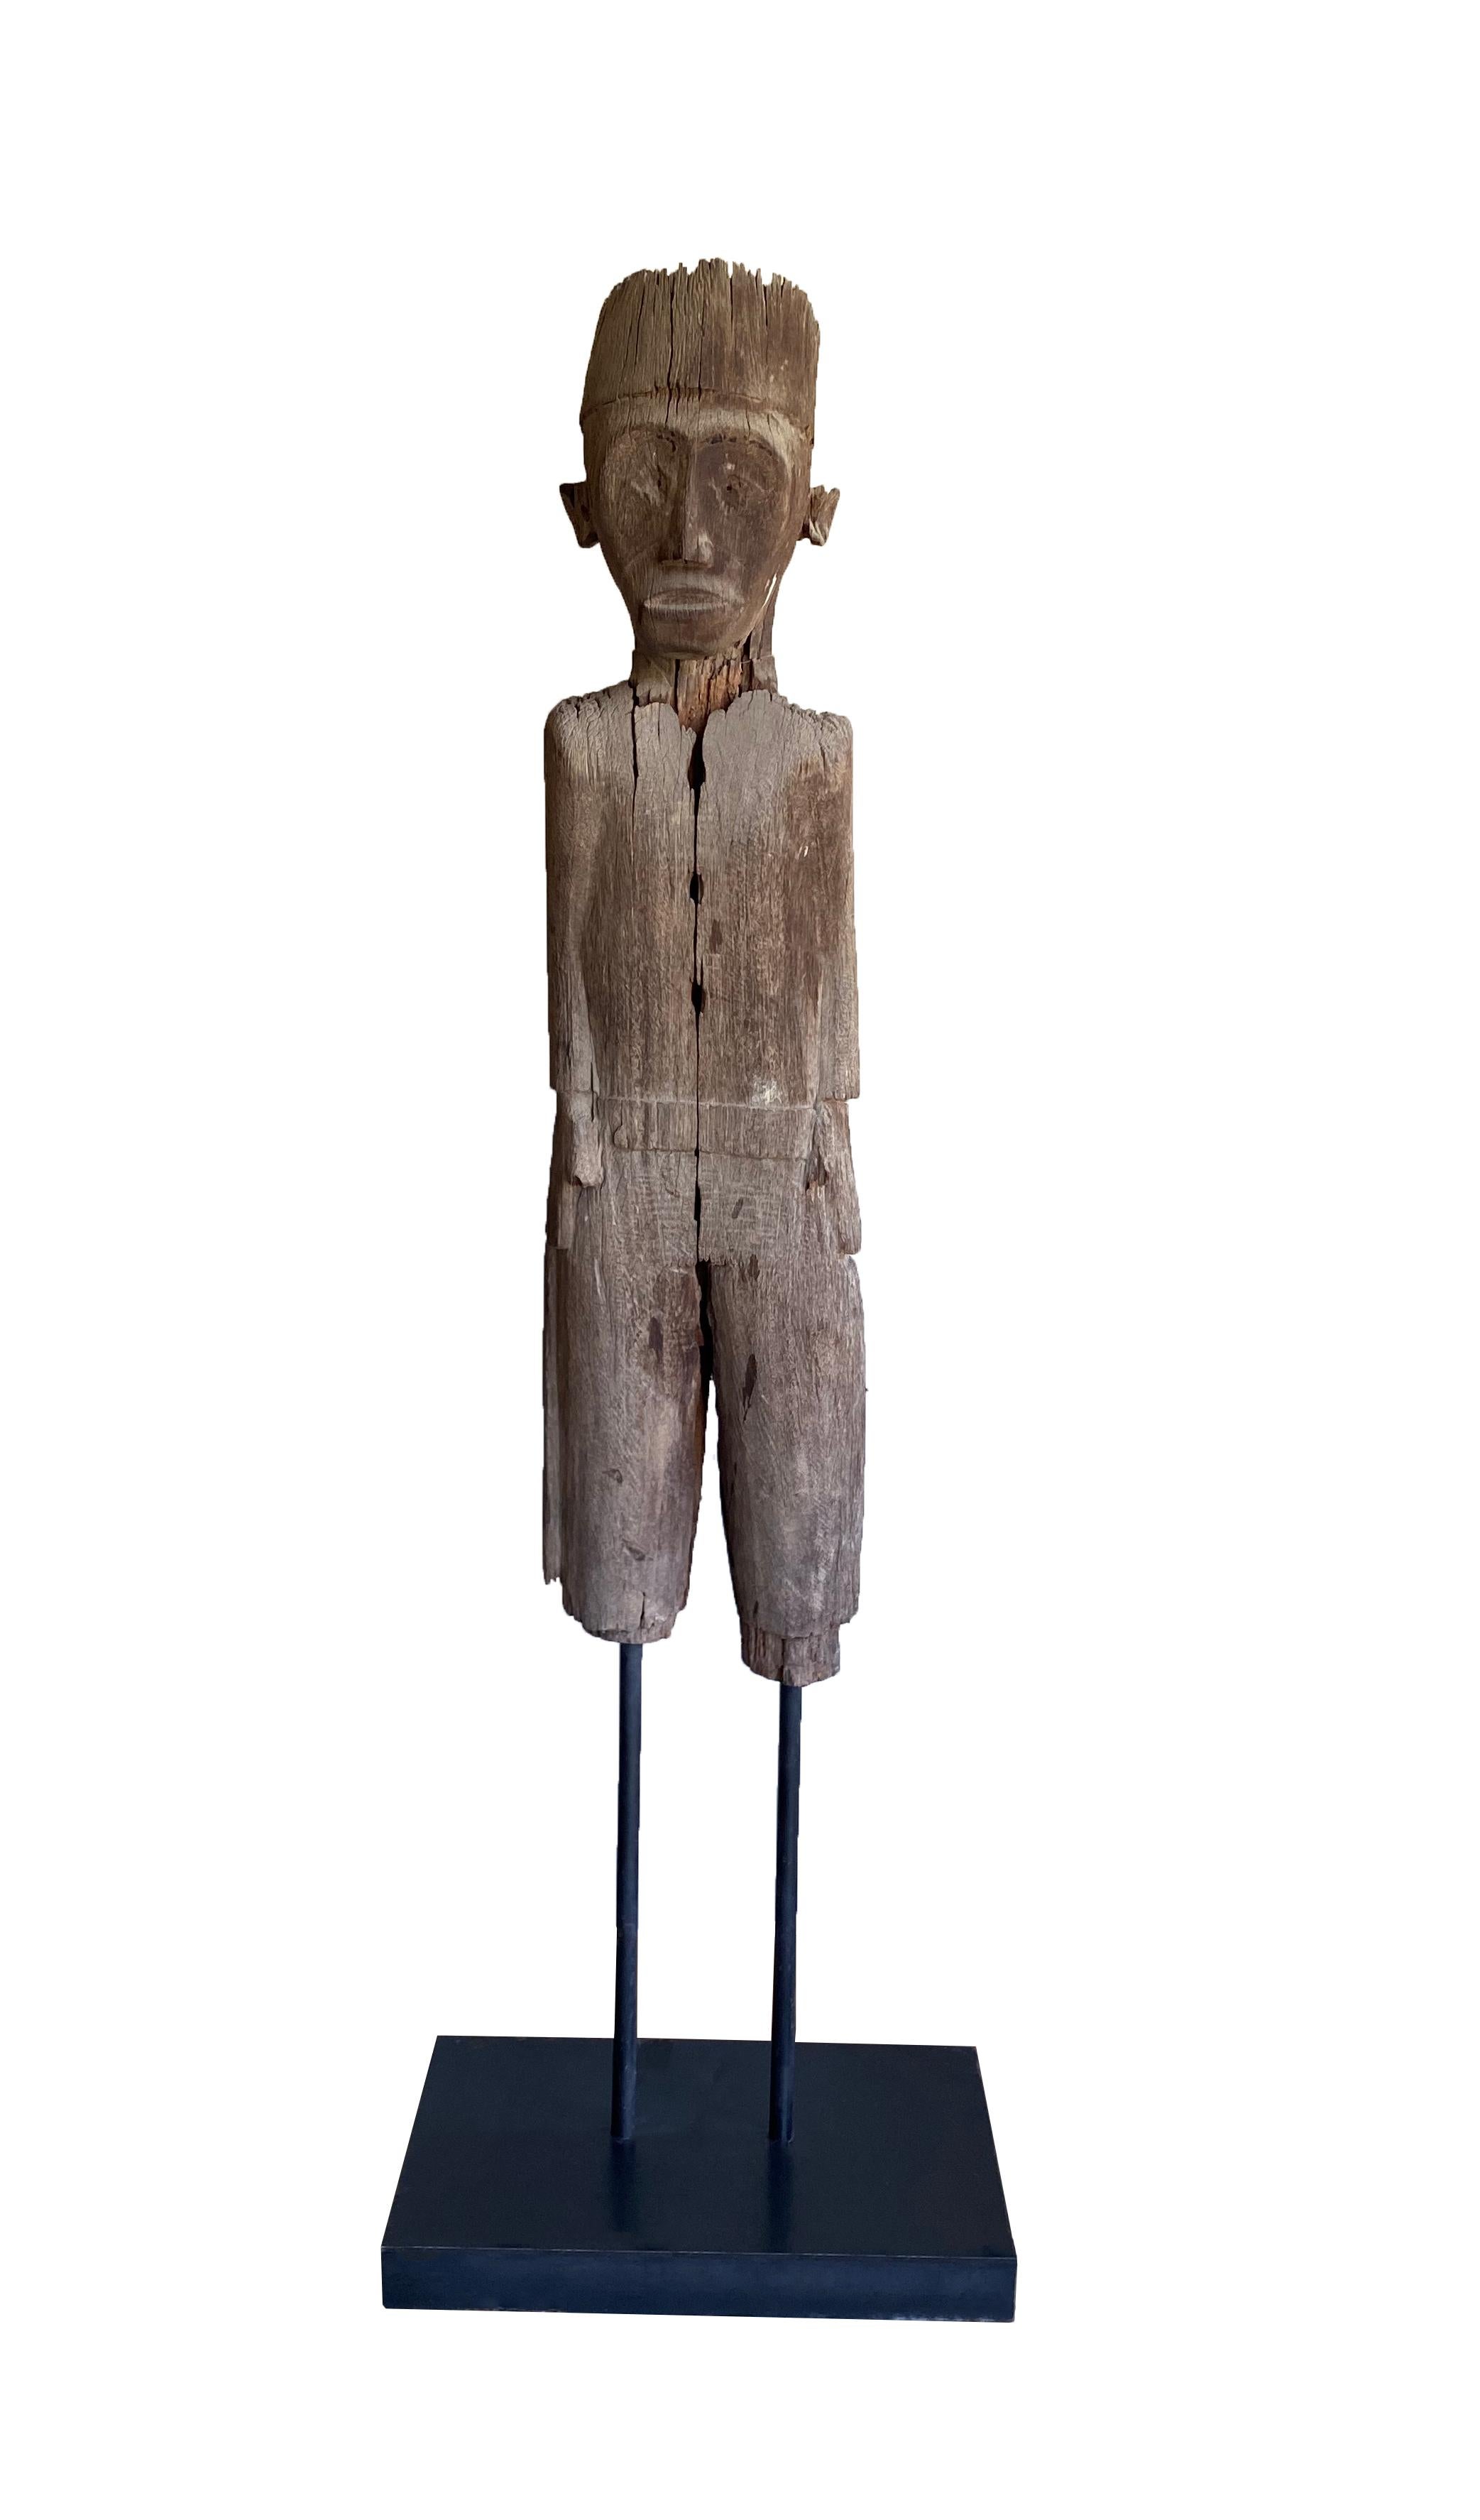 A Kalimantan carved standing sculpture of a man by the Dayak people from the interior rain forests of Borneo. Carved with a beautiful natural patina effect, this statue was originally used as a protective figure standing guard in front of tribe